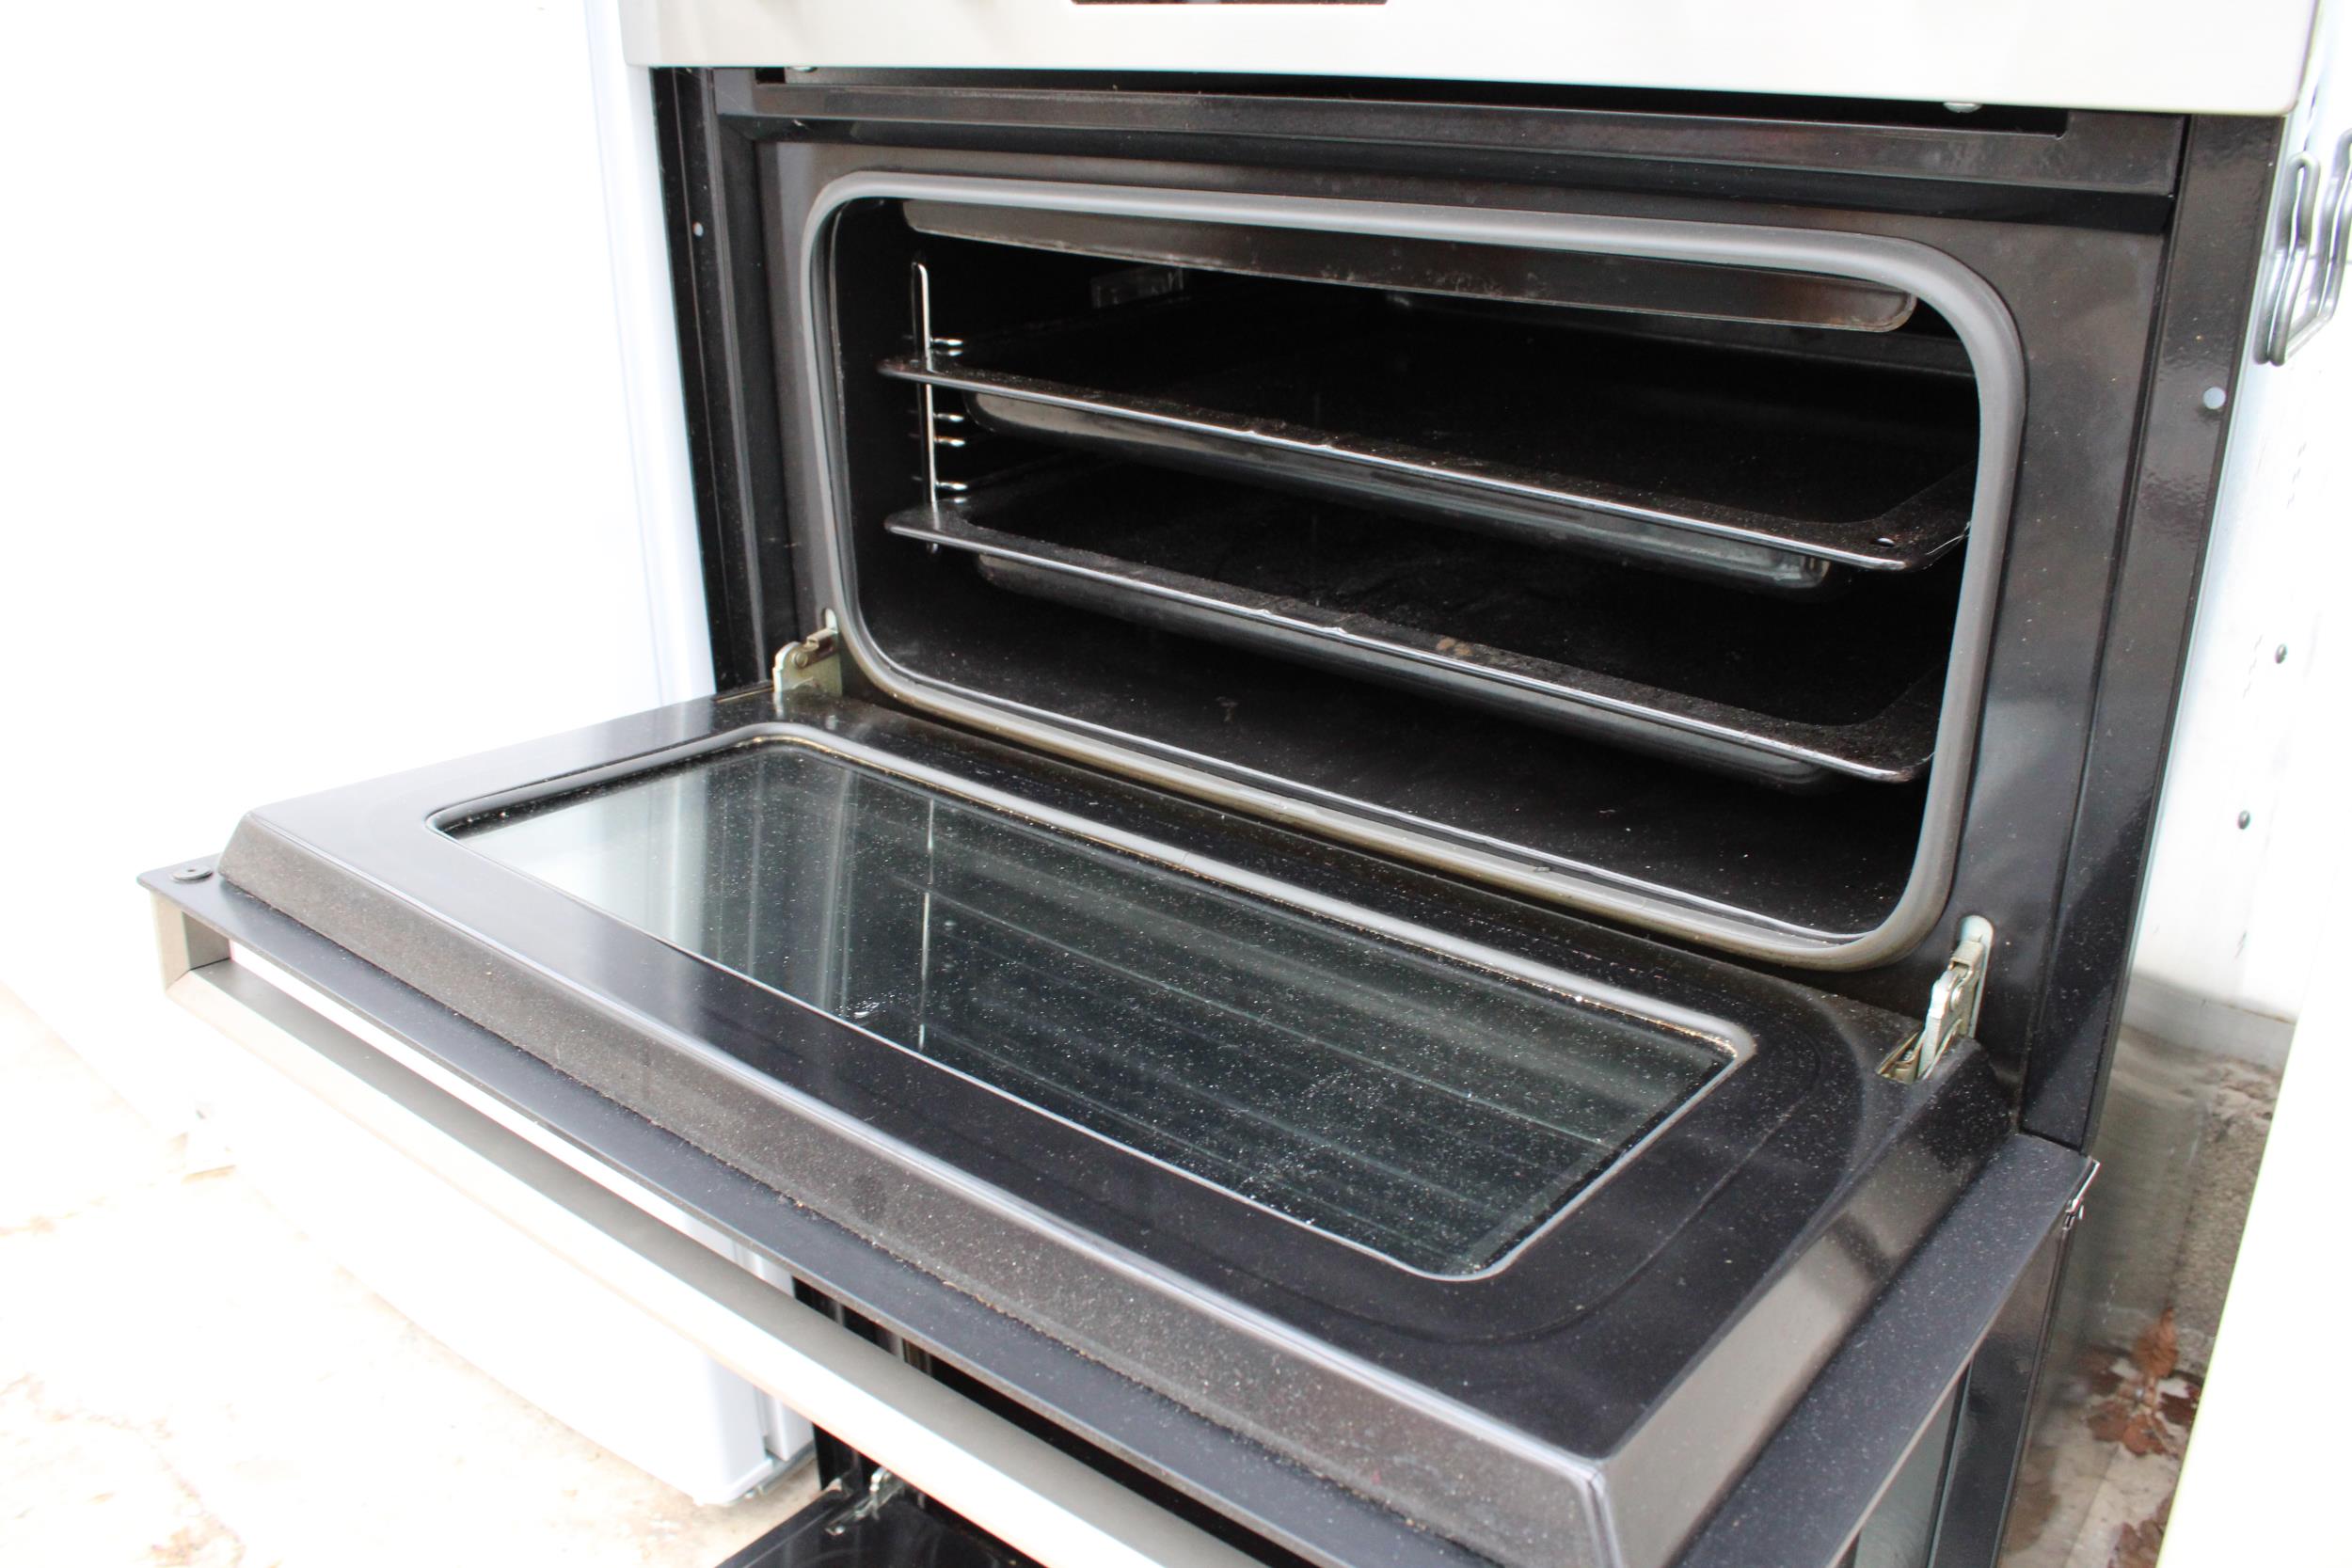 A CHROME AND BLACK BAUMATIC INTERGRATED DOUBLE OVEN - Image 3 of 3